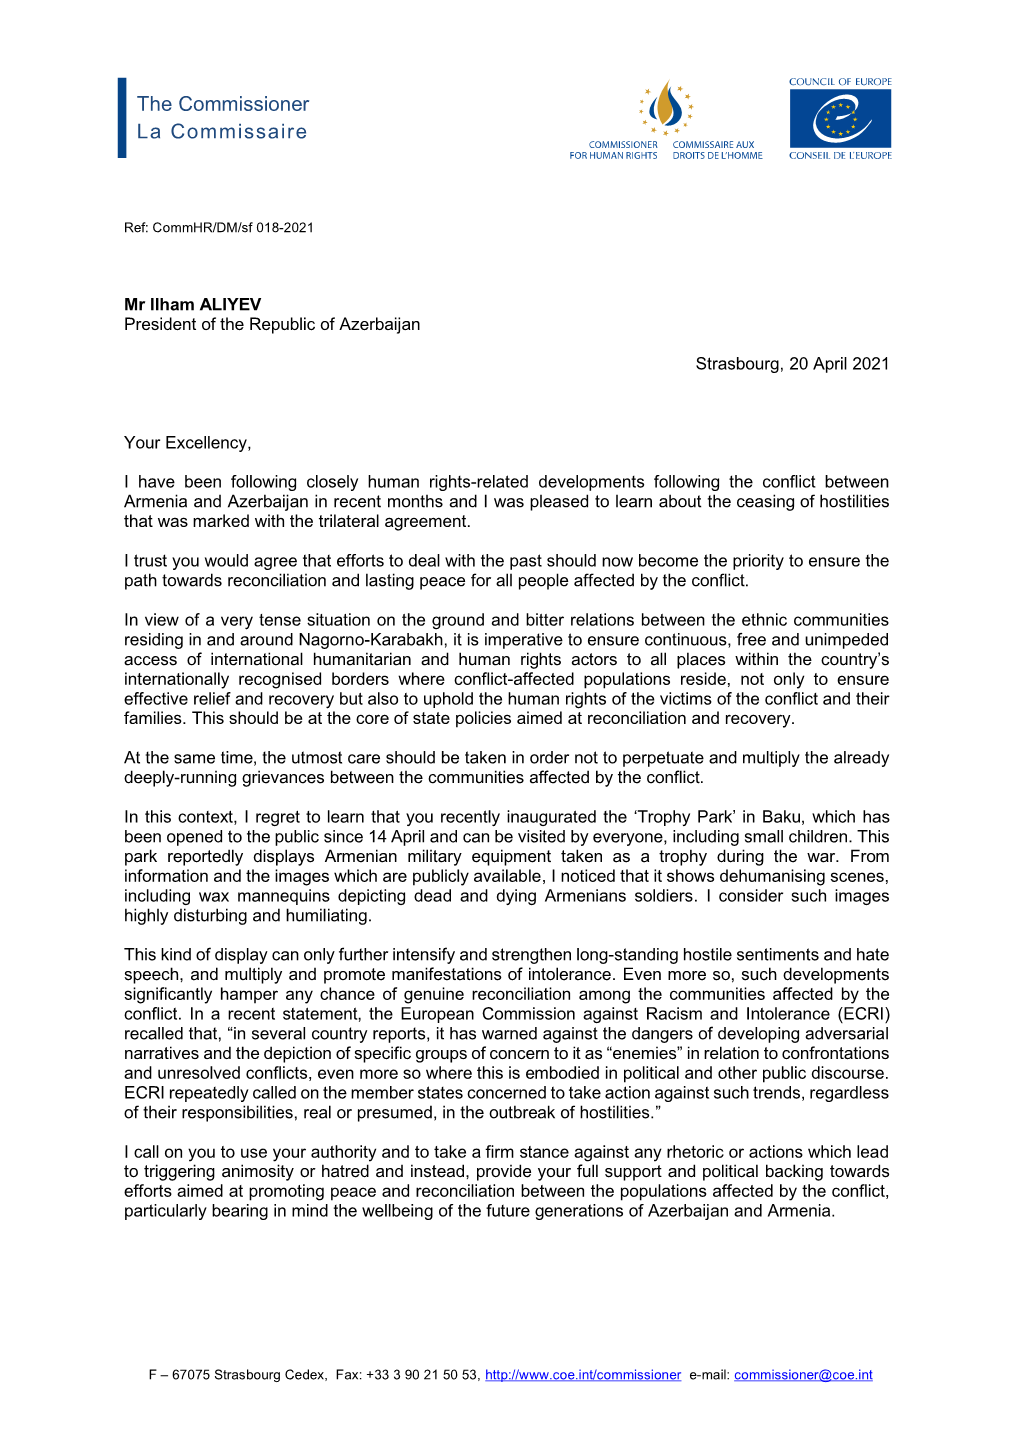 Letter to the President of the Republic of Azerbaijan